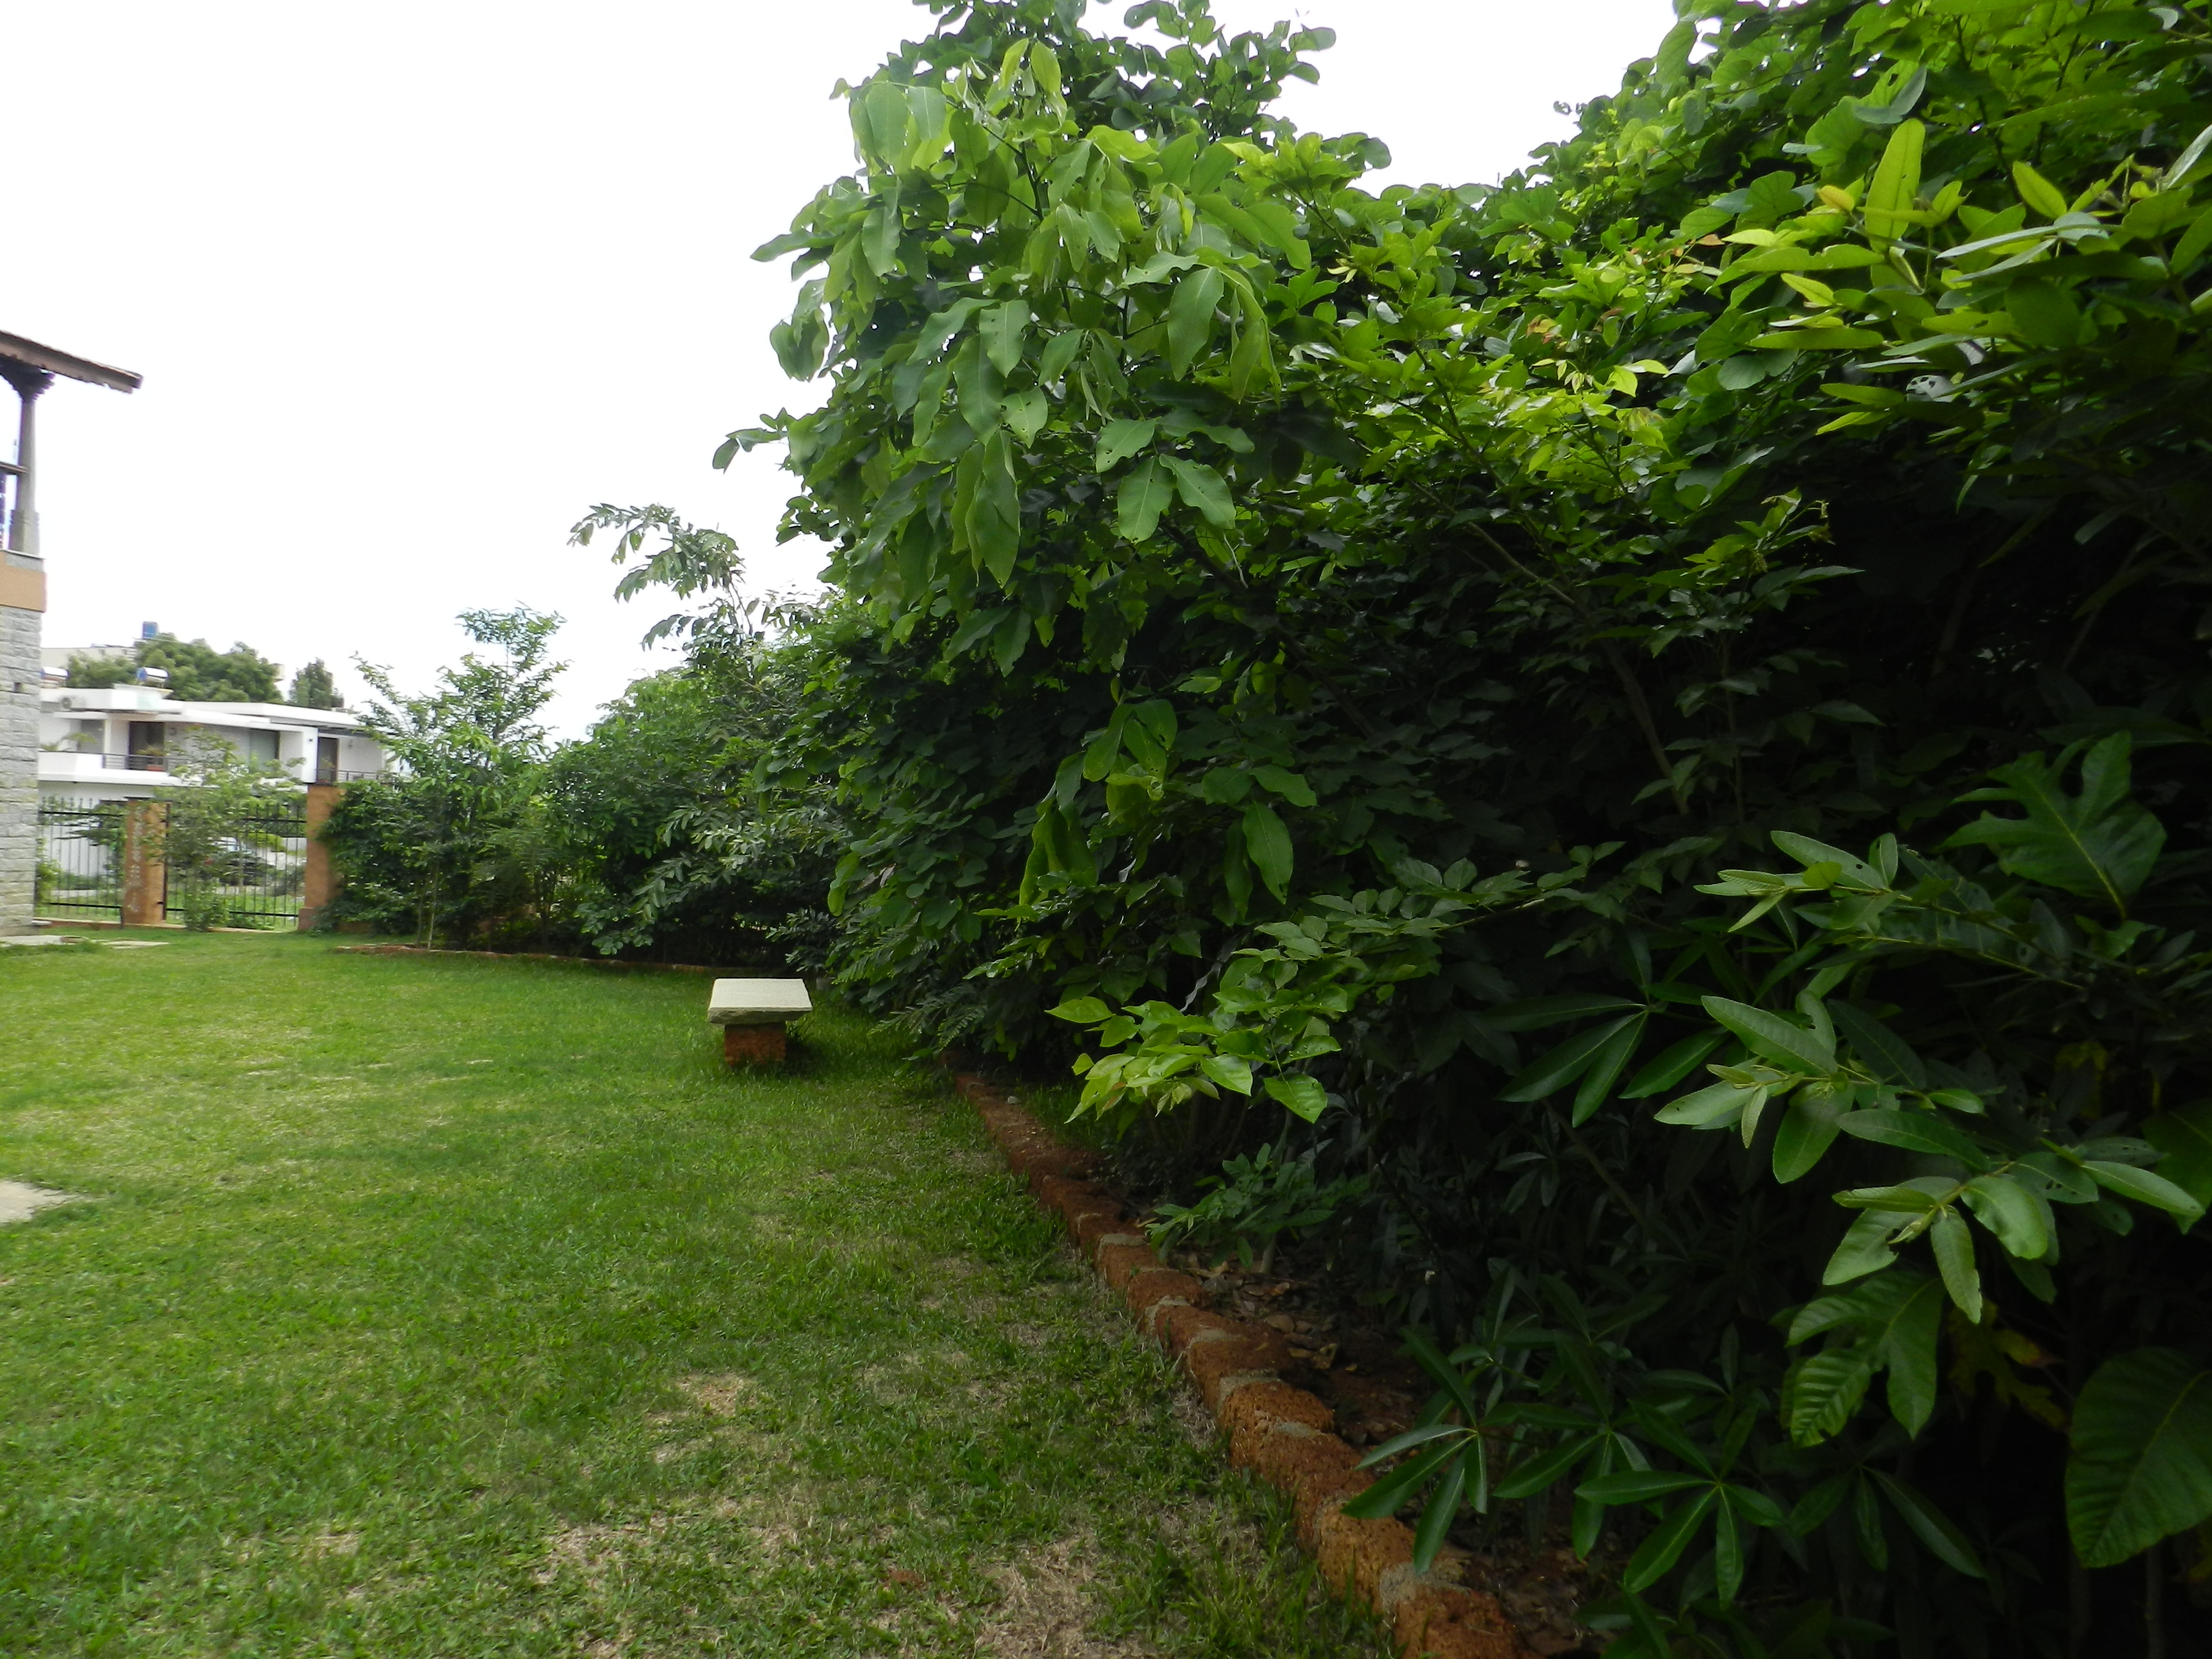 An Afforest project transforms a barren piece of land into a lush, dense forest on a residential estate. Photo: Afforestt